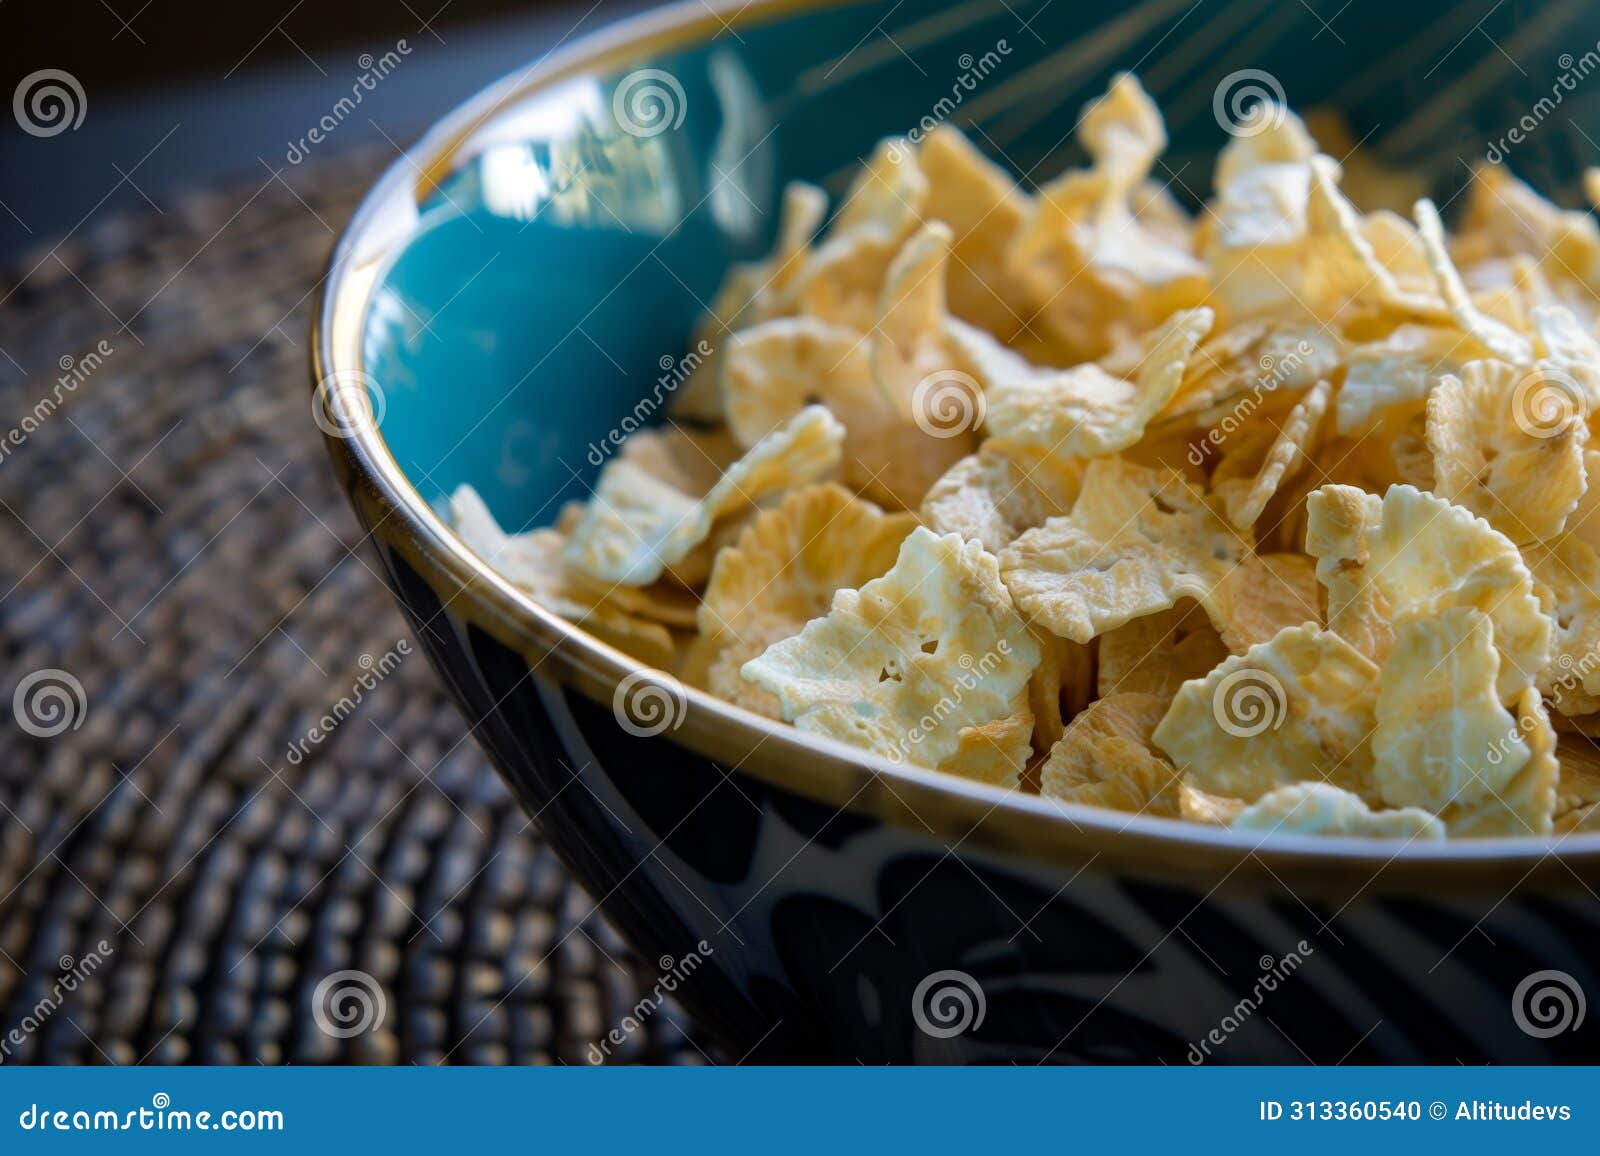 unfinished bowl of cereal with soggy flakes